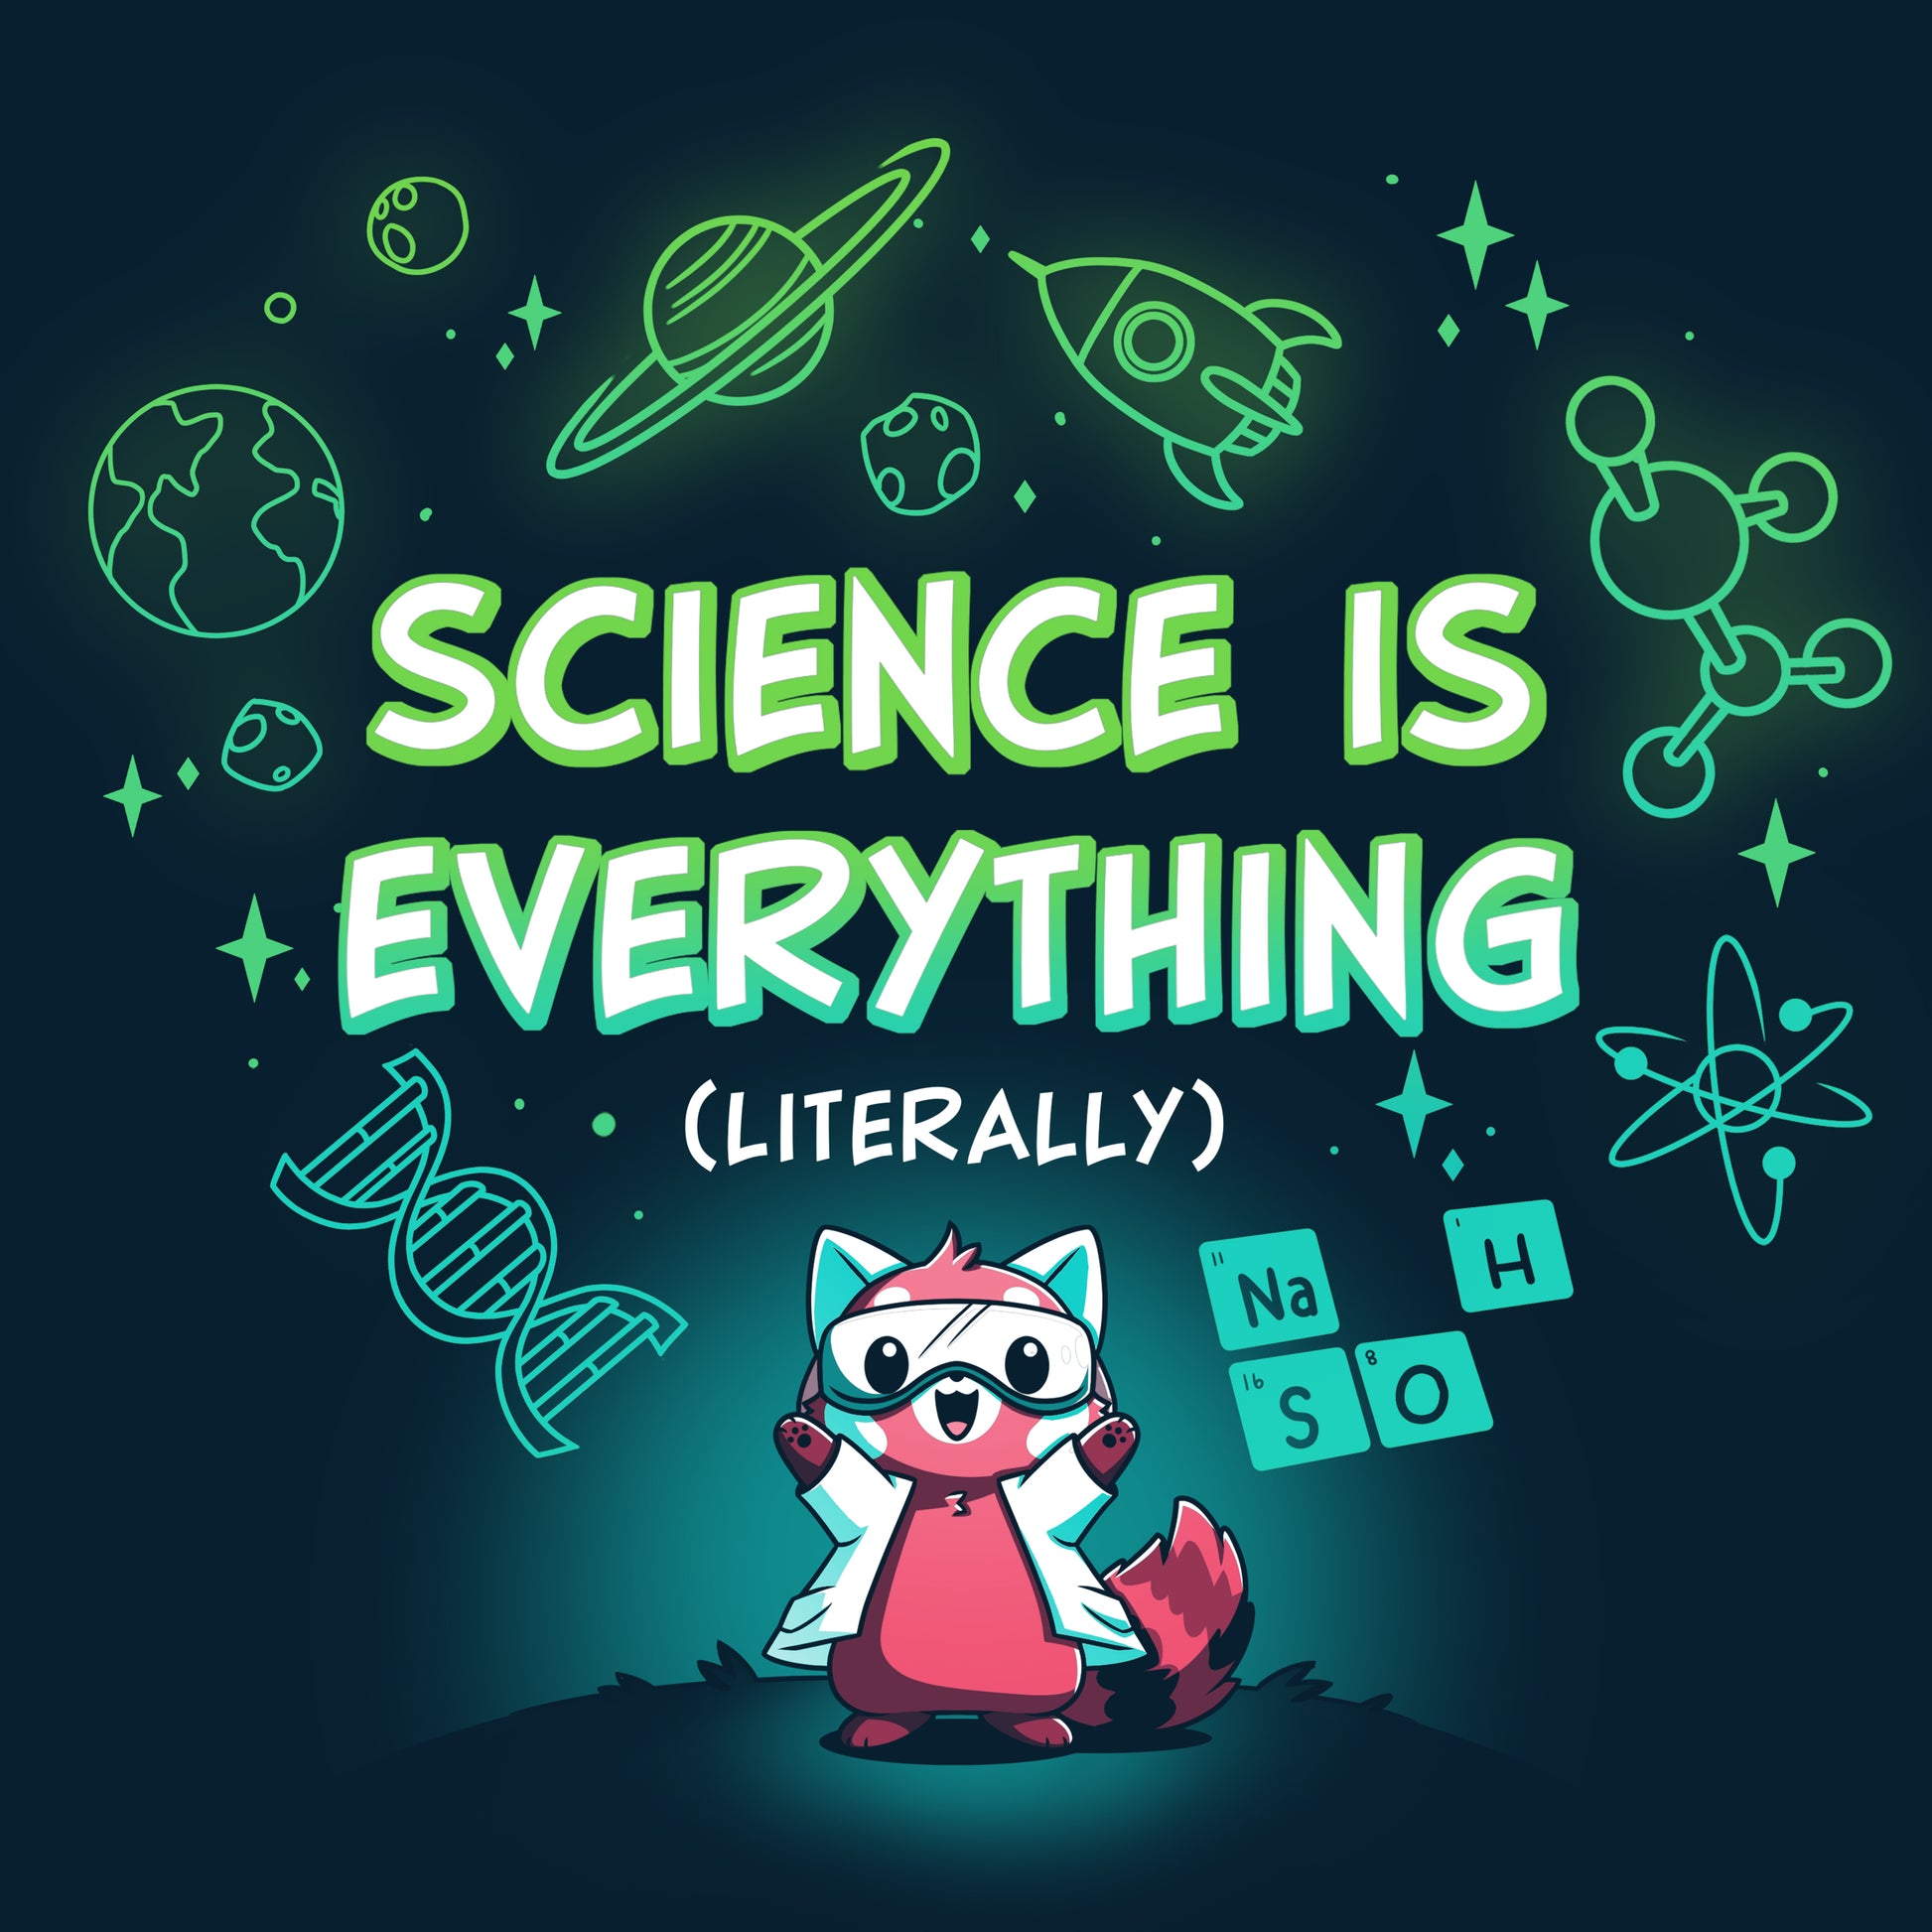 A cartoon superhero raccoon in a lab coat stands beneath the phrase "Science is Everything (Literally)," surrounded by science-related icons like planets, molecules, a DNA strand, and chemical elements. Available on a super soft cotton navy blue t-shirt, the Science is Literally Everything by monsterdigital is the perfect science t-shirt for enthusiasts.